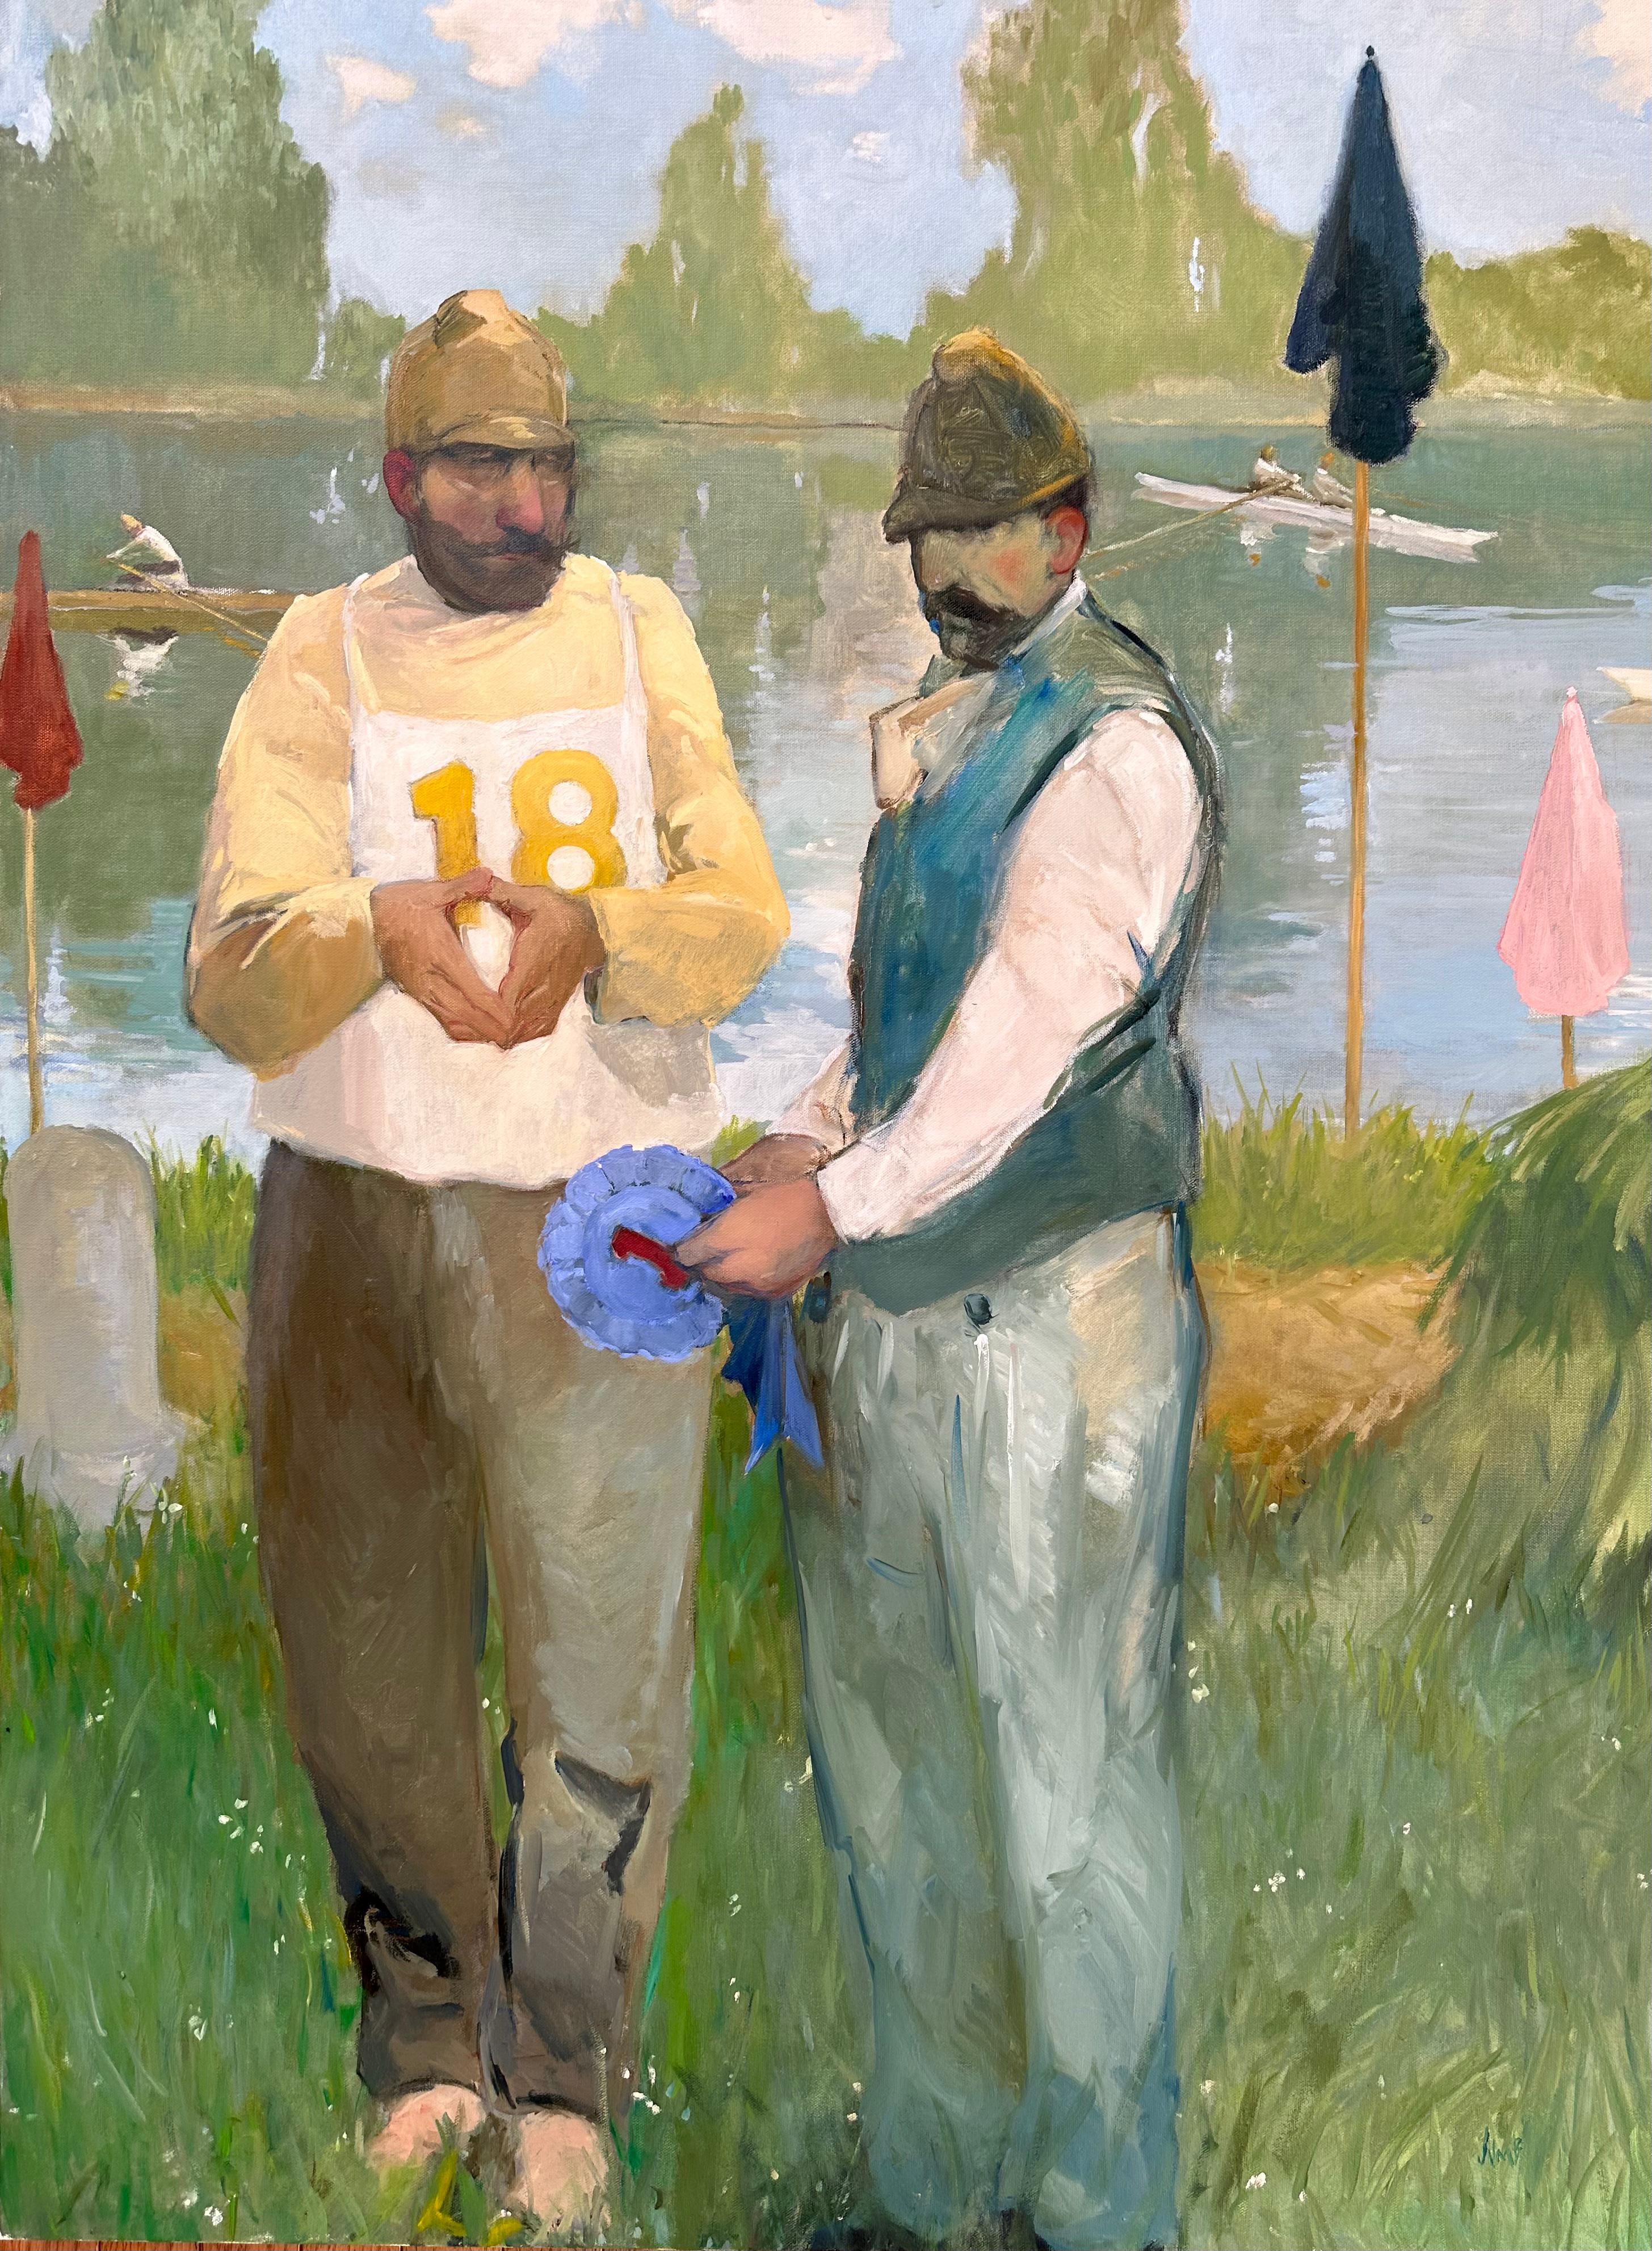 Jennifer Bell Figurative Painting - "The Regatta" Oil painting of two men at boat race, Impressionism, Lake front